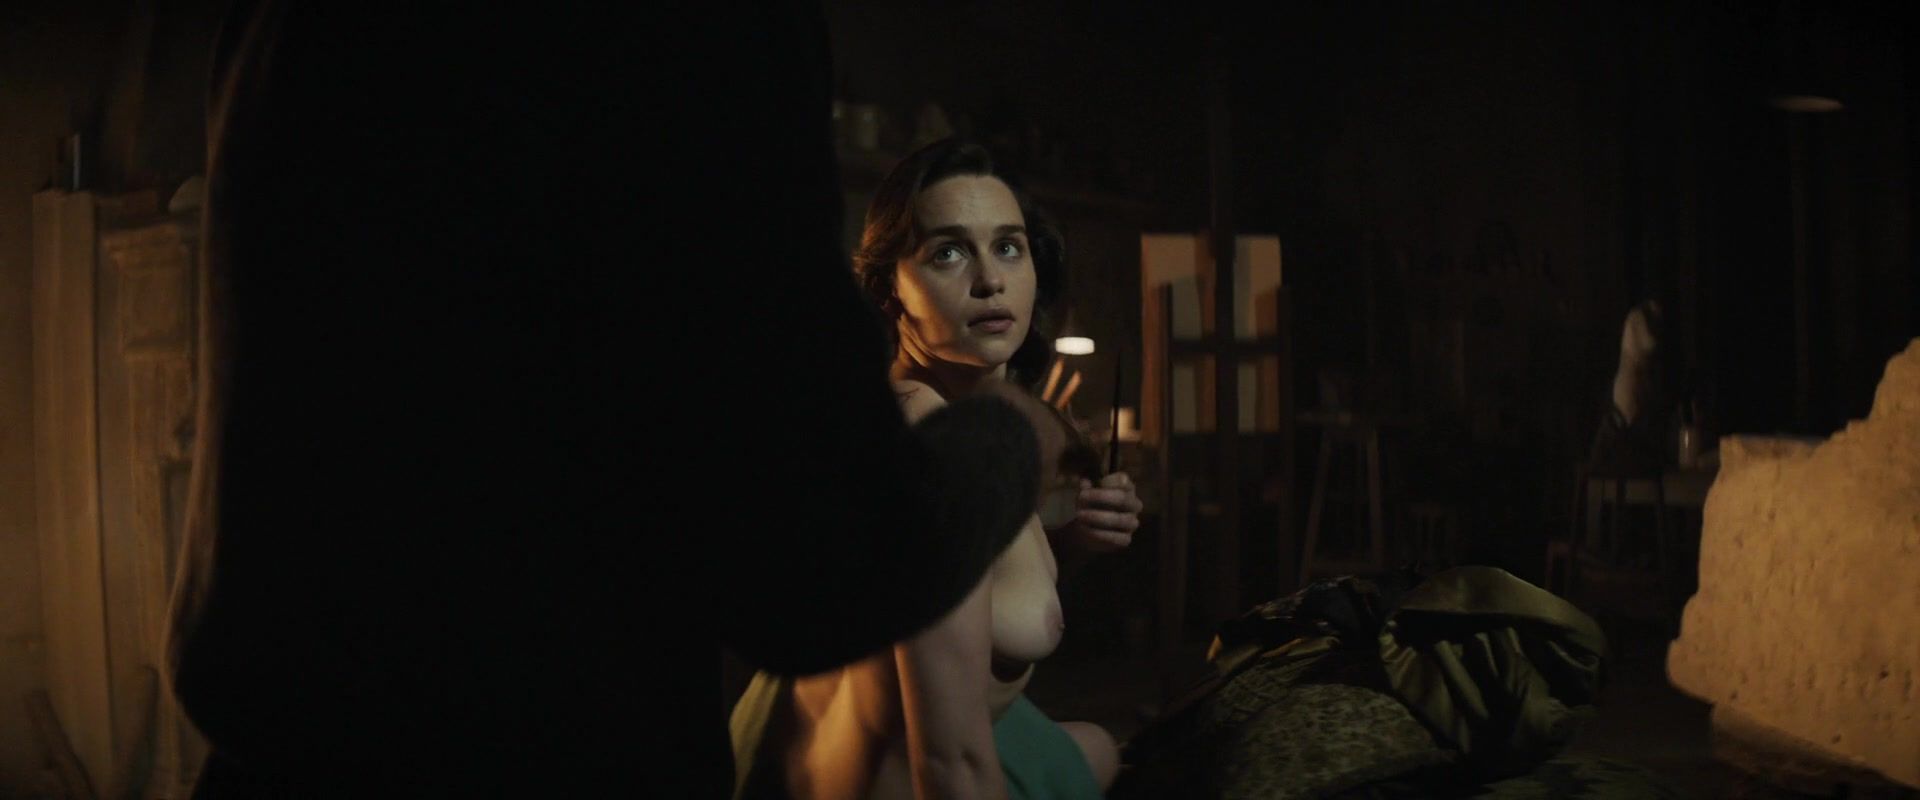 Blow Jobs Porn Naked Emilia Clarke in topless scene of the movie "Voice from the Stone" | Released in 2017 Female